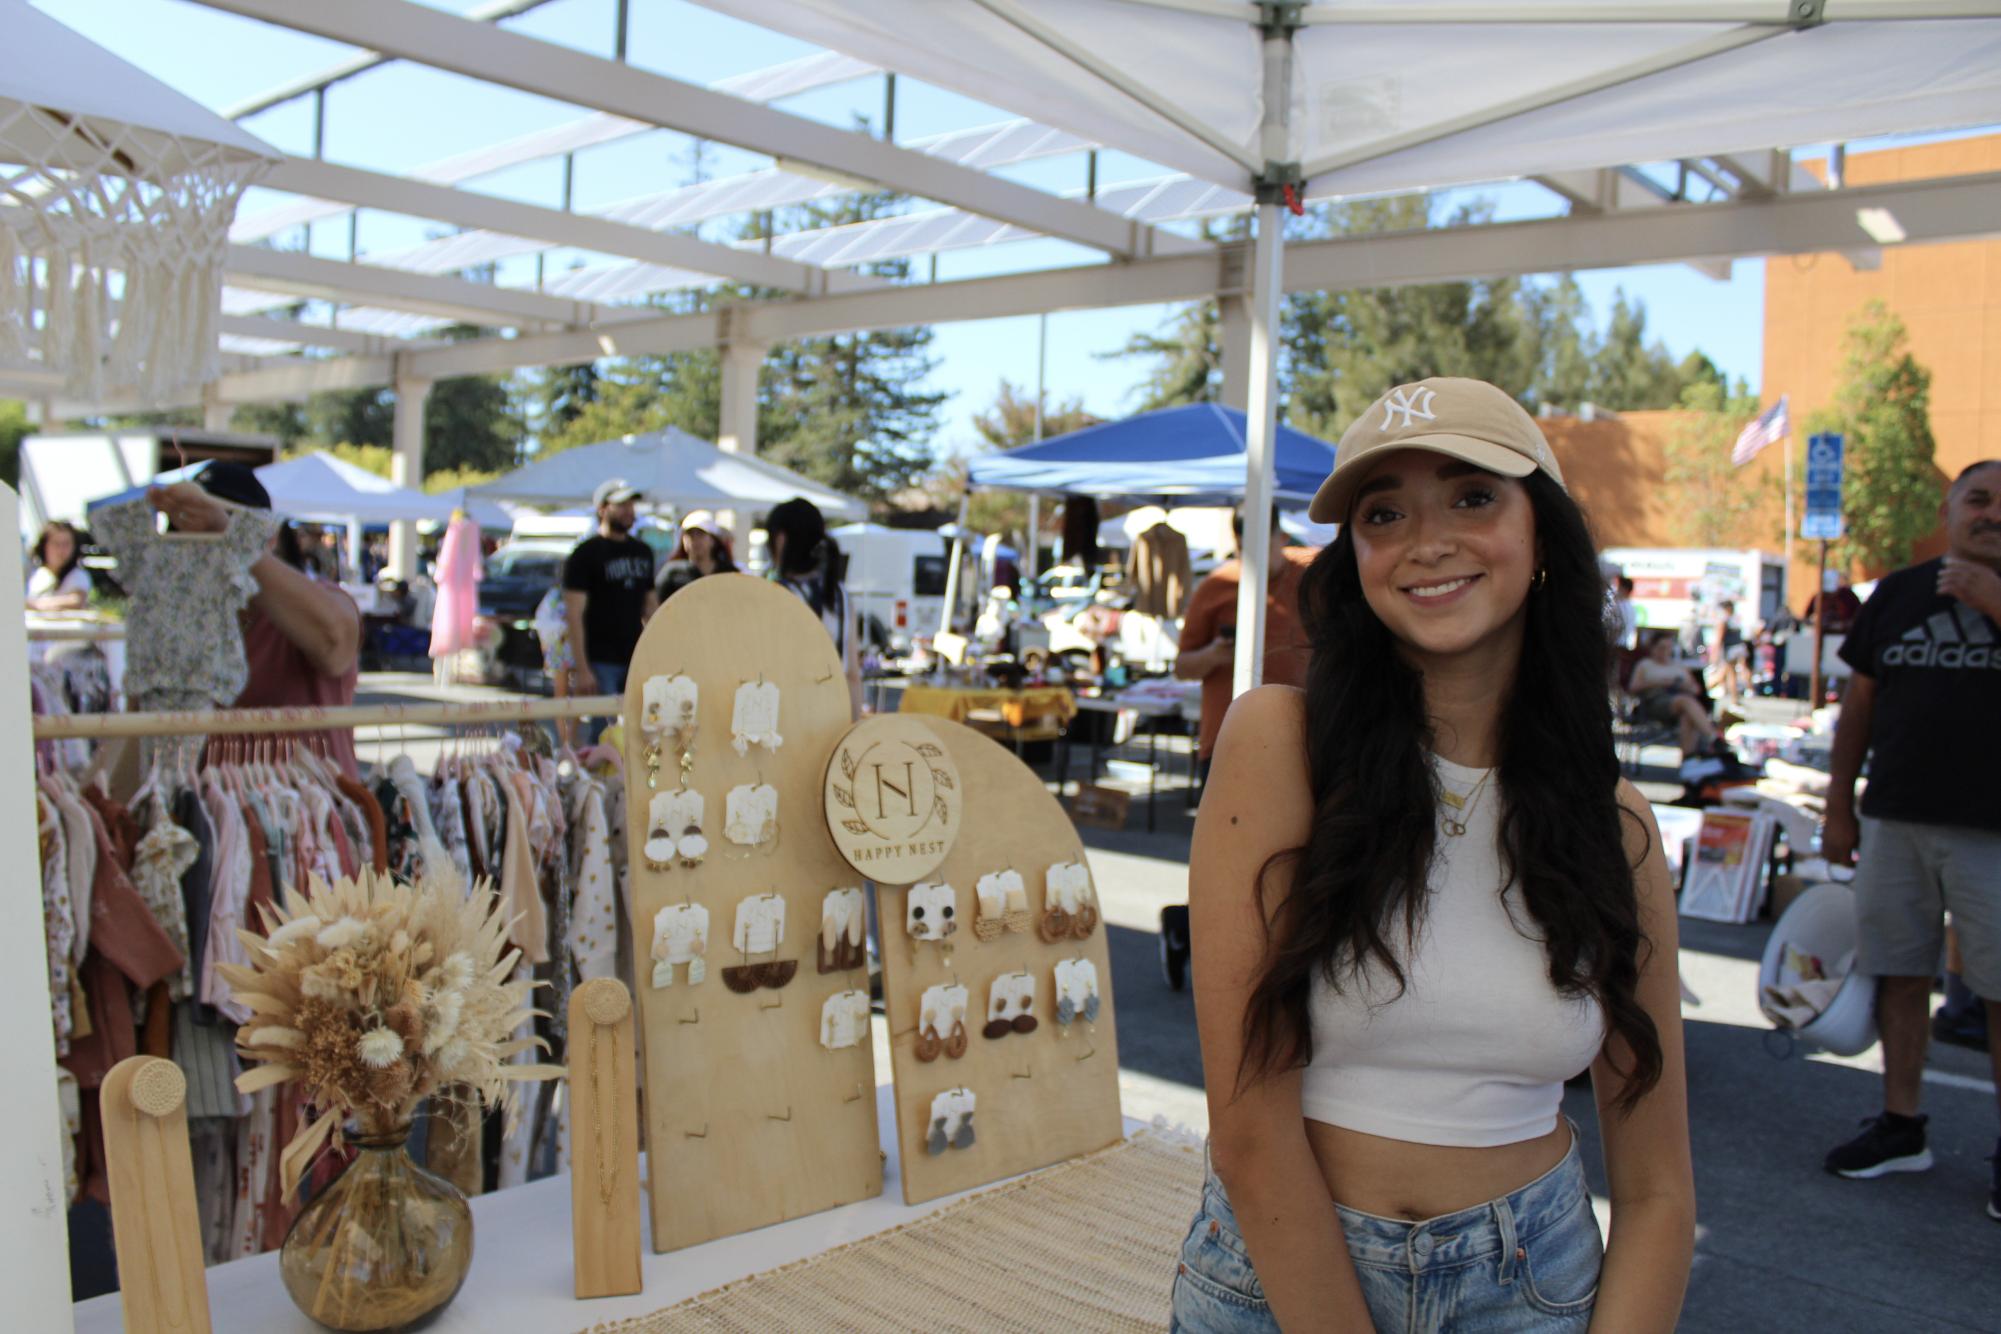 Irie Ramirez poses next to a stand of Happy Nest earrings.